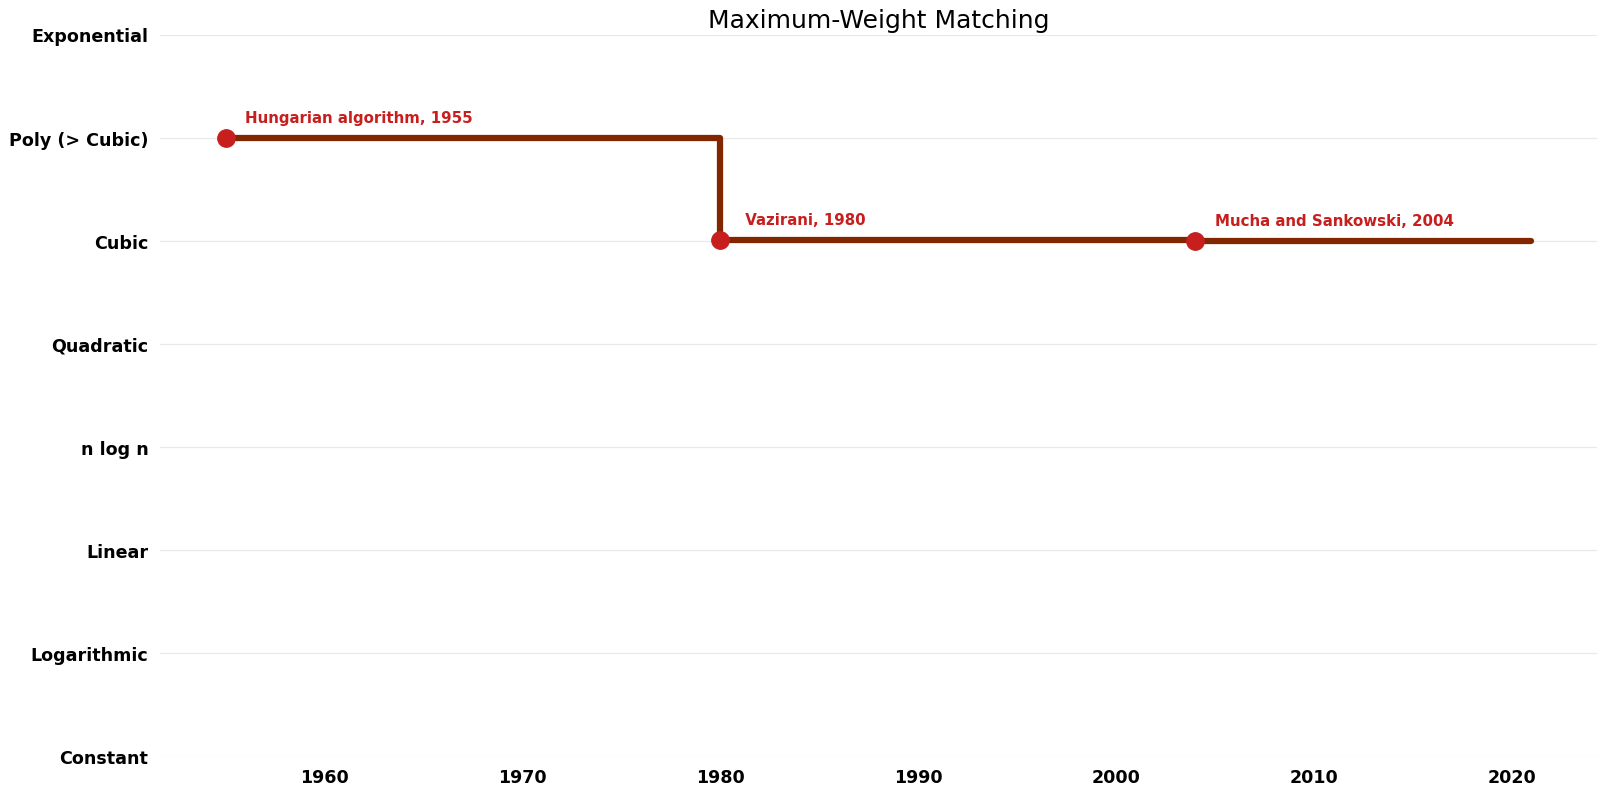 File:Maximum-Weight Matching - Time.png